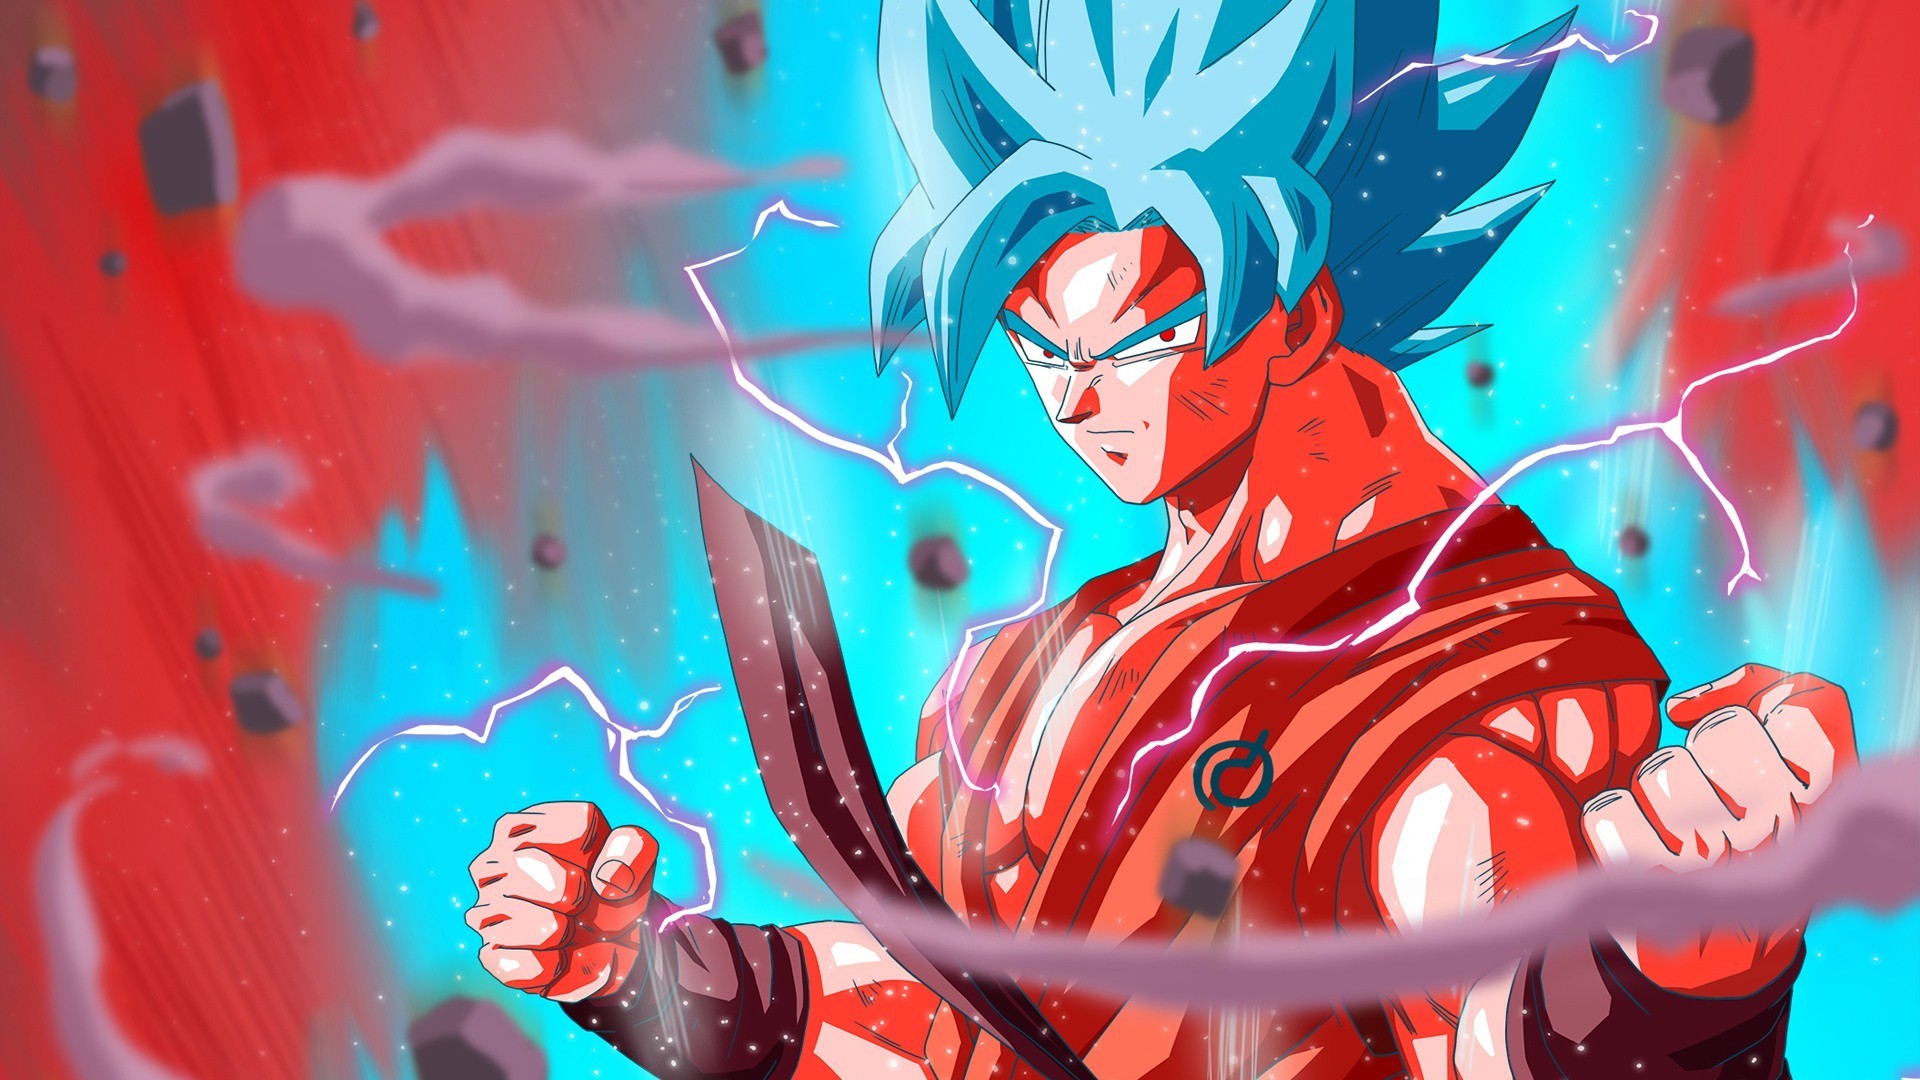 HD Wallpaper Goku SSJ Blue With Resolution 1920X1080 pixel. You can make this wallpaper for your Desktop Computer Backgrounds, Mac Wallpapers, Android Lock screen or iPhone Screensavers